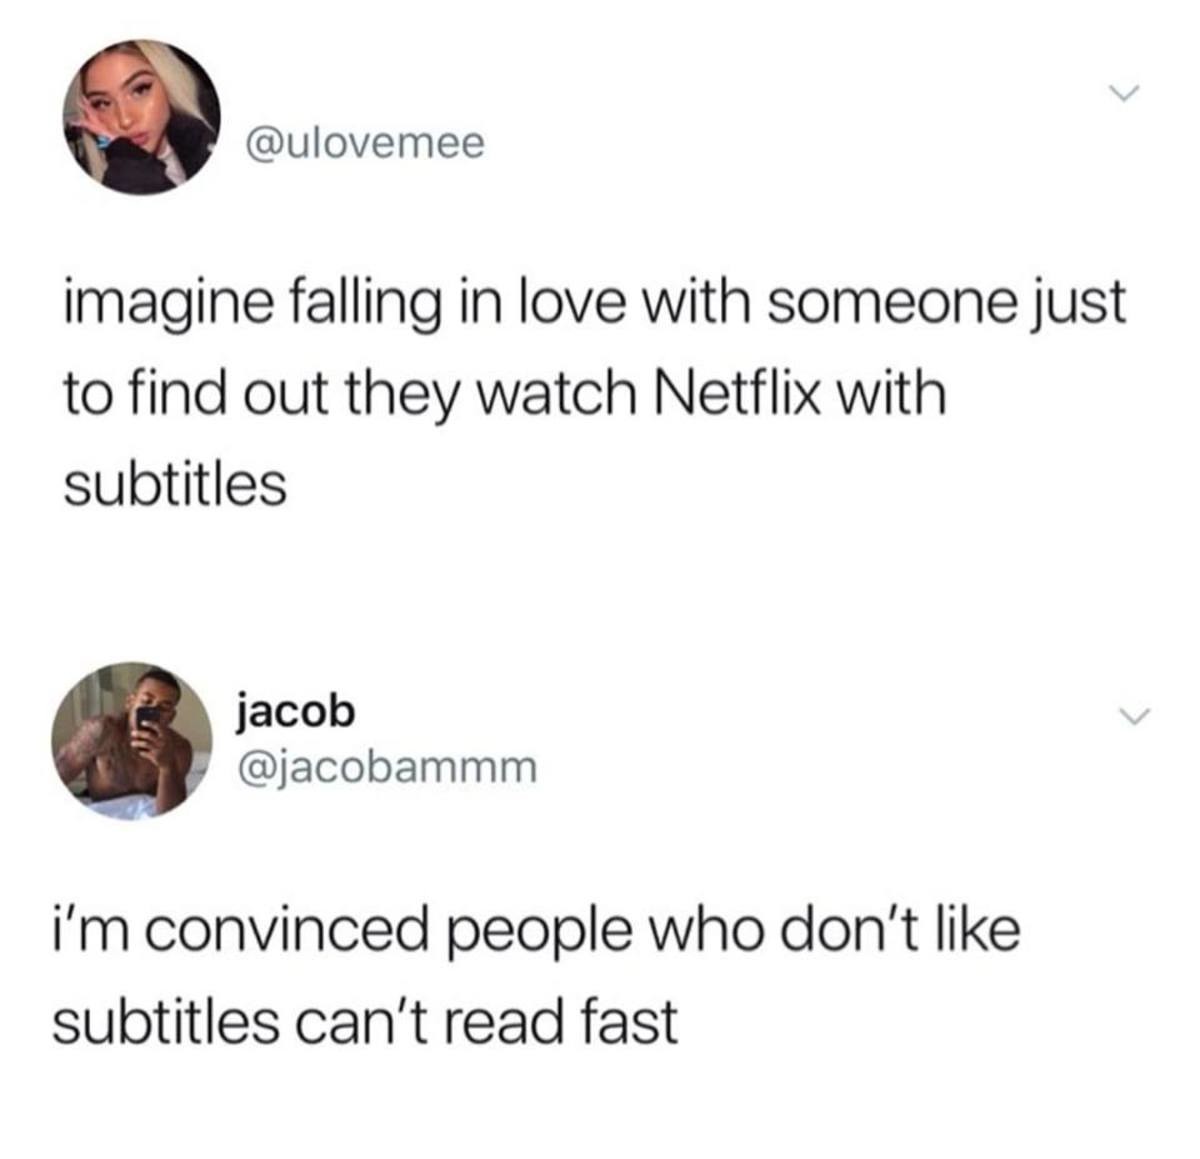 netflix subtitles meme - imagine falling in love with someone just to find out they watch Netflix with subtitles jacob i'm convinced people who don't subtitles can't read fast